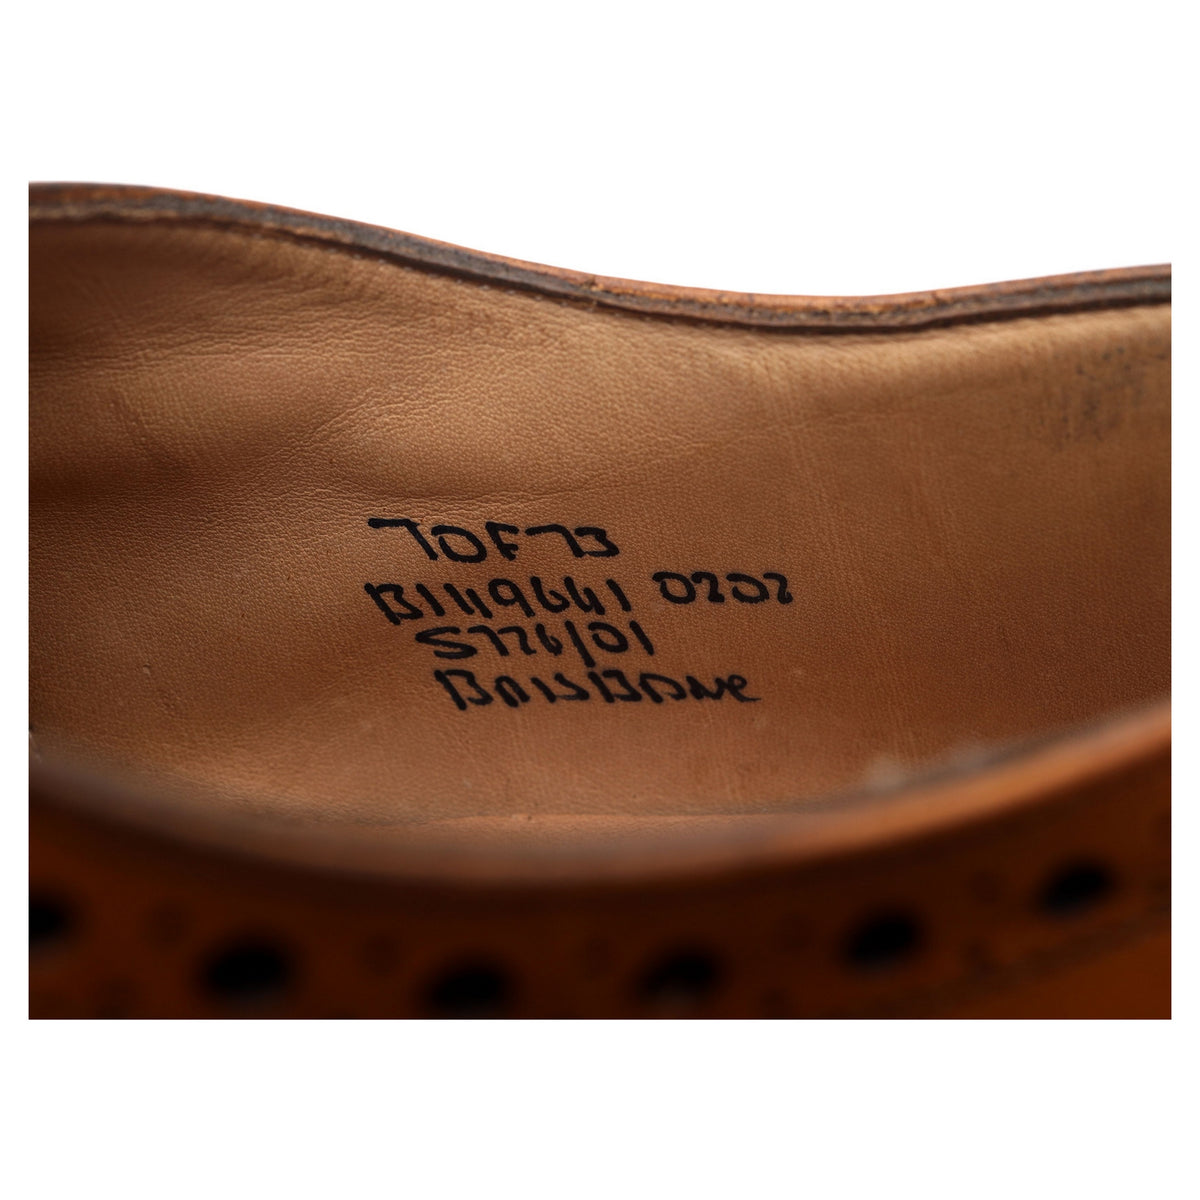 Brisbane' Tan Brown Leather Brogues UK 7 F - Abbot's Shoes